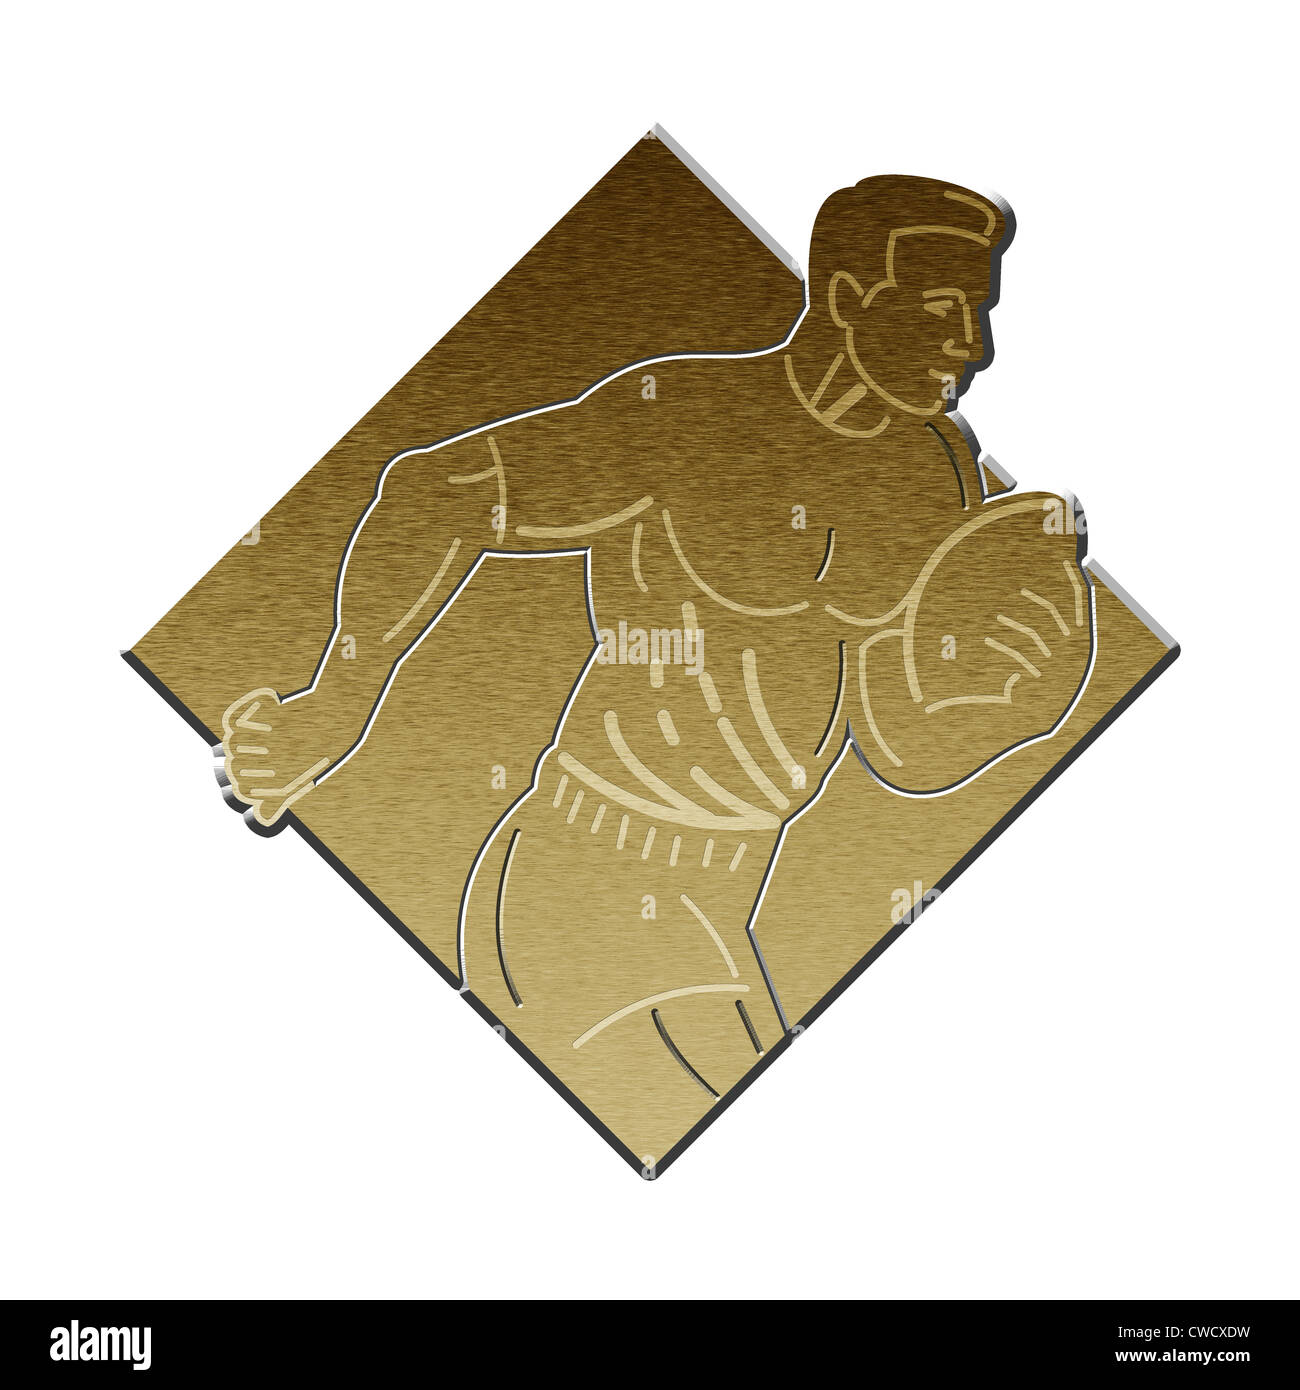 illustration of a rugby player running passing the ball on isolated background done in metallic gold style. Stock Photo